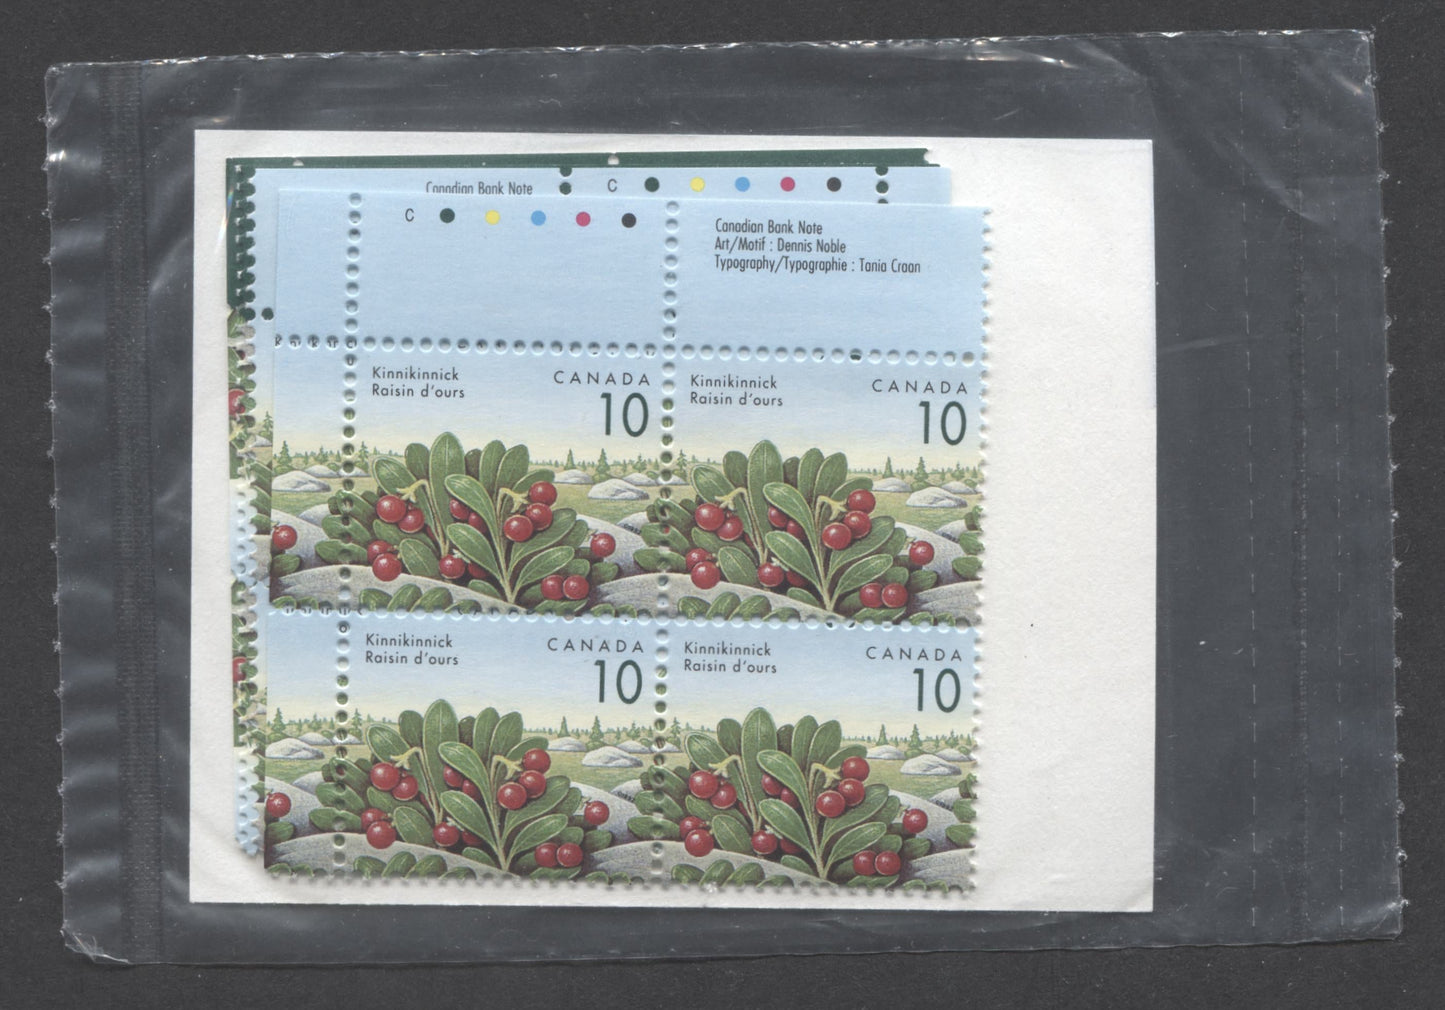 Lot 23 Canada #1354iii 10c Multicoloured 1992 - 1998 Edible Berries Definitive Issue, Canada Post Sealed Pack of Inscription Blocks, CBN Printing On DF CPP Paper, With HB Type 6A Insert Card, VFNH, Unitrade Cat. $27.5